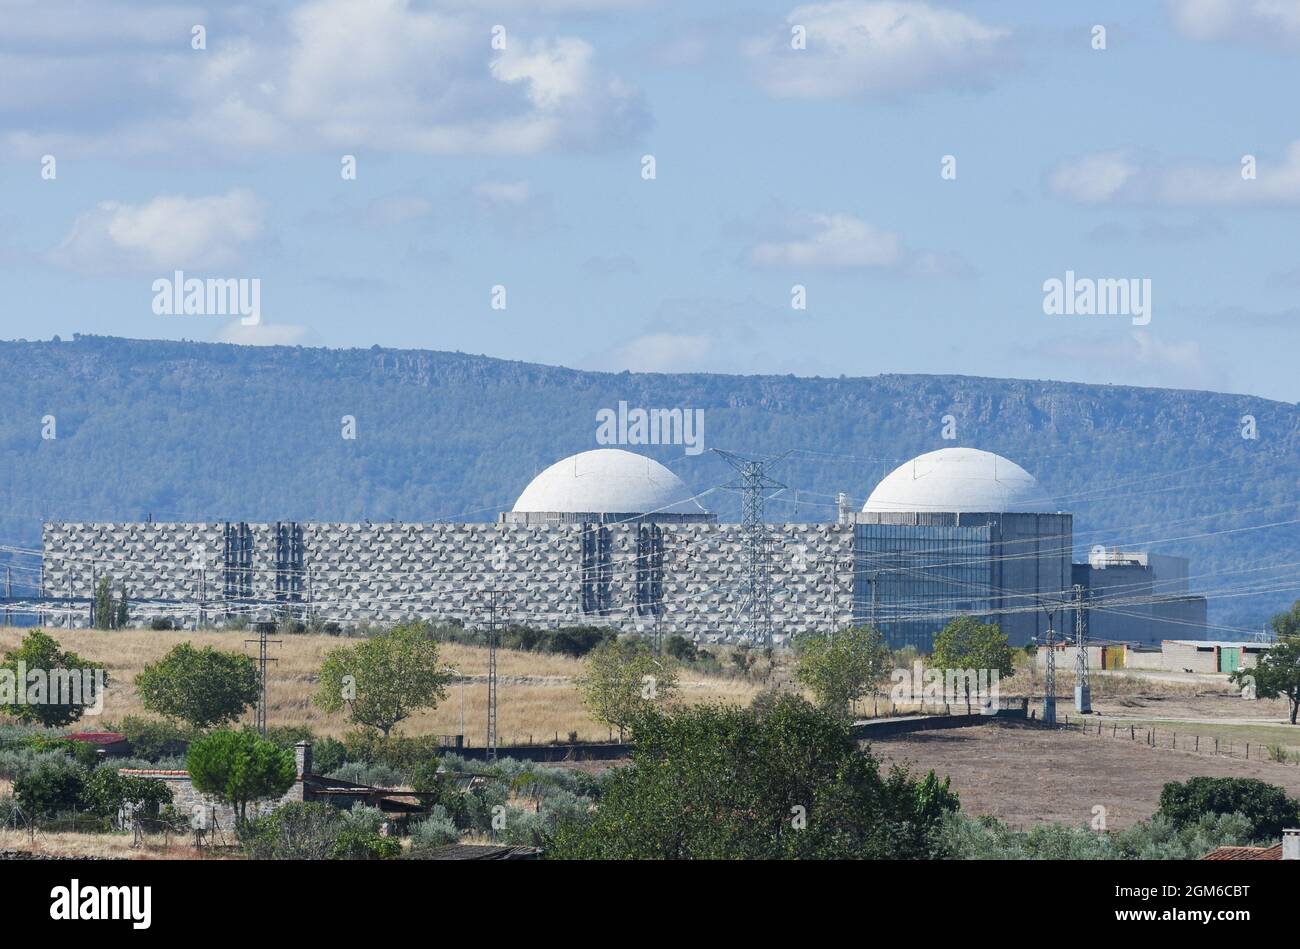 View of the Nuclear Power Plant of Almaraz in Caceres. Property of Iberdrola Generación Nuclear, S.A.U. (53%), Endesa Generación, S.A.U (36%) and Gas Natural Fenosa Generación, S.L.U. (11%), this is one of the nuclear power plants that could close because the generation of electricity could not be profitable for the owners with the Government measures. Spanish Government has targeted €2.6bn in “excess profits” from utilities that do not use gas but have benefited anyway from the way rising gas prices have driven electricity prices higher. However, Spain's nuclear power association said the ne Stock Photo